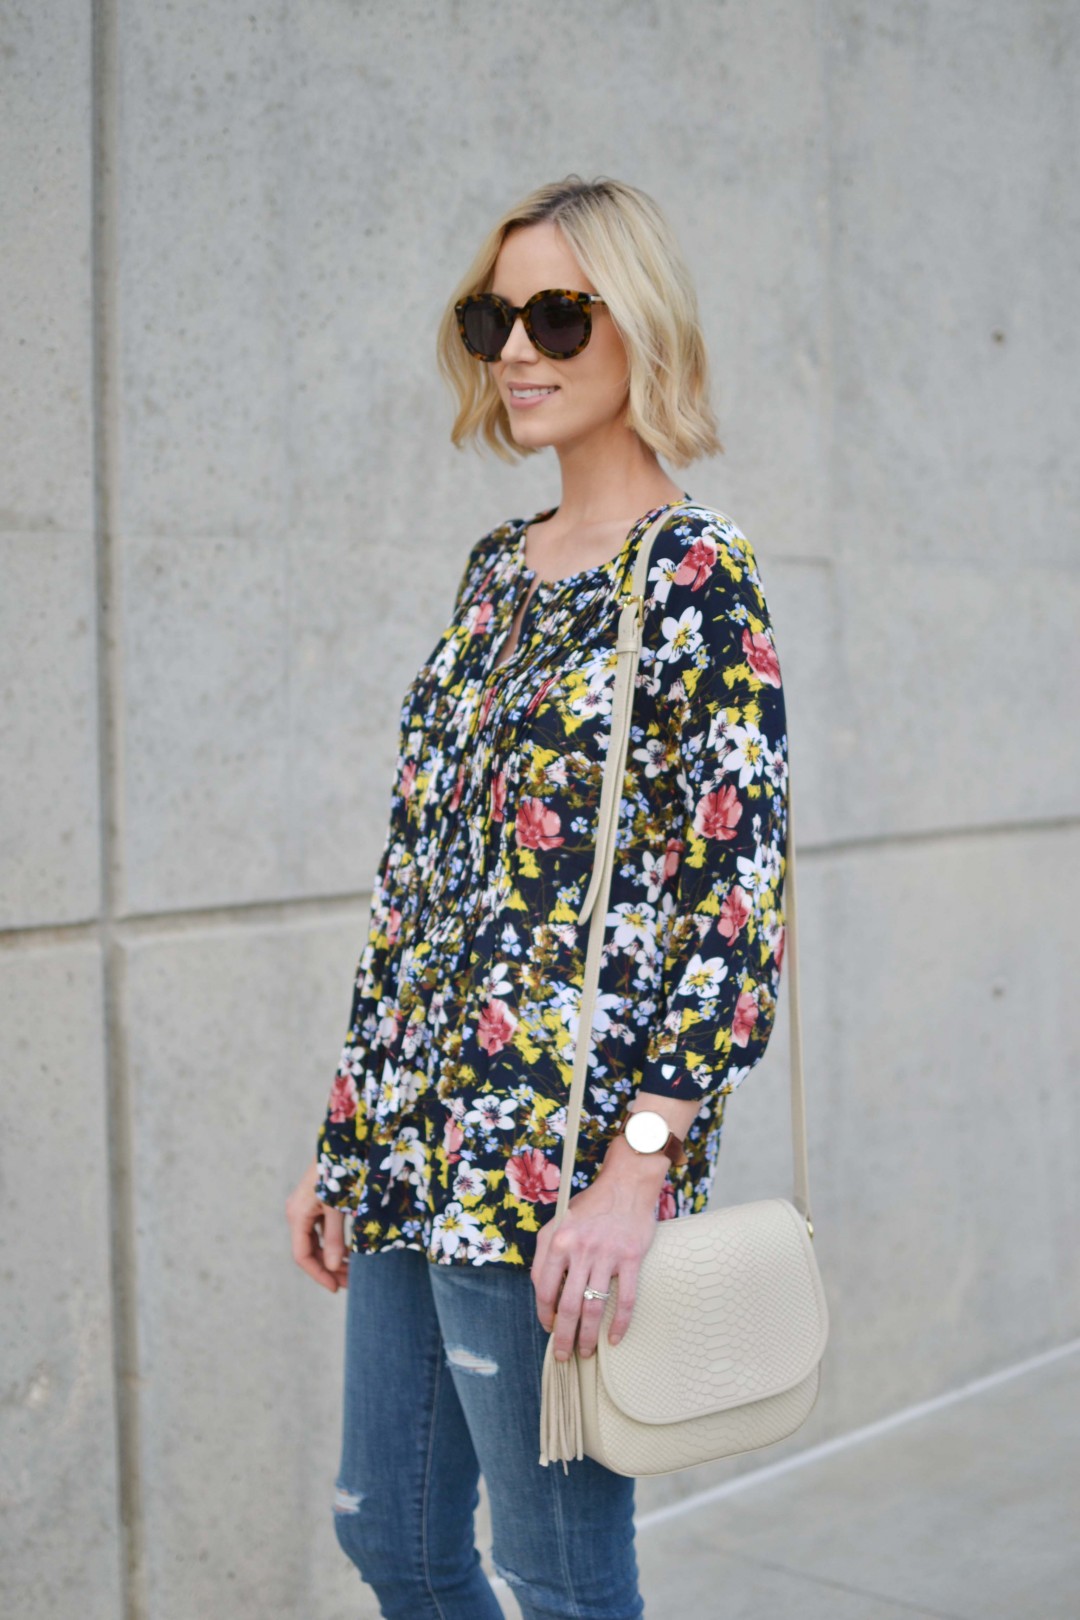 Floral and Distressed Denim - Straight A Style